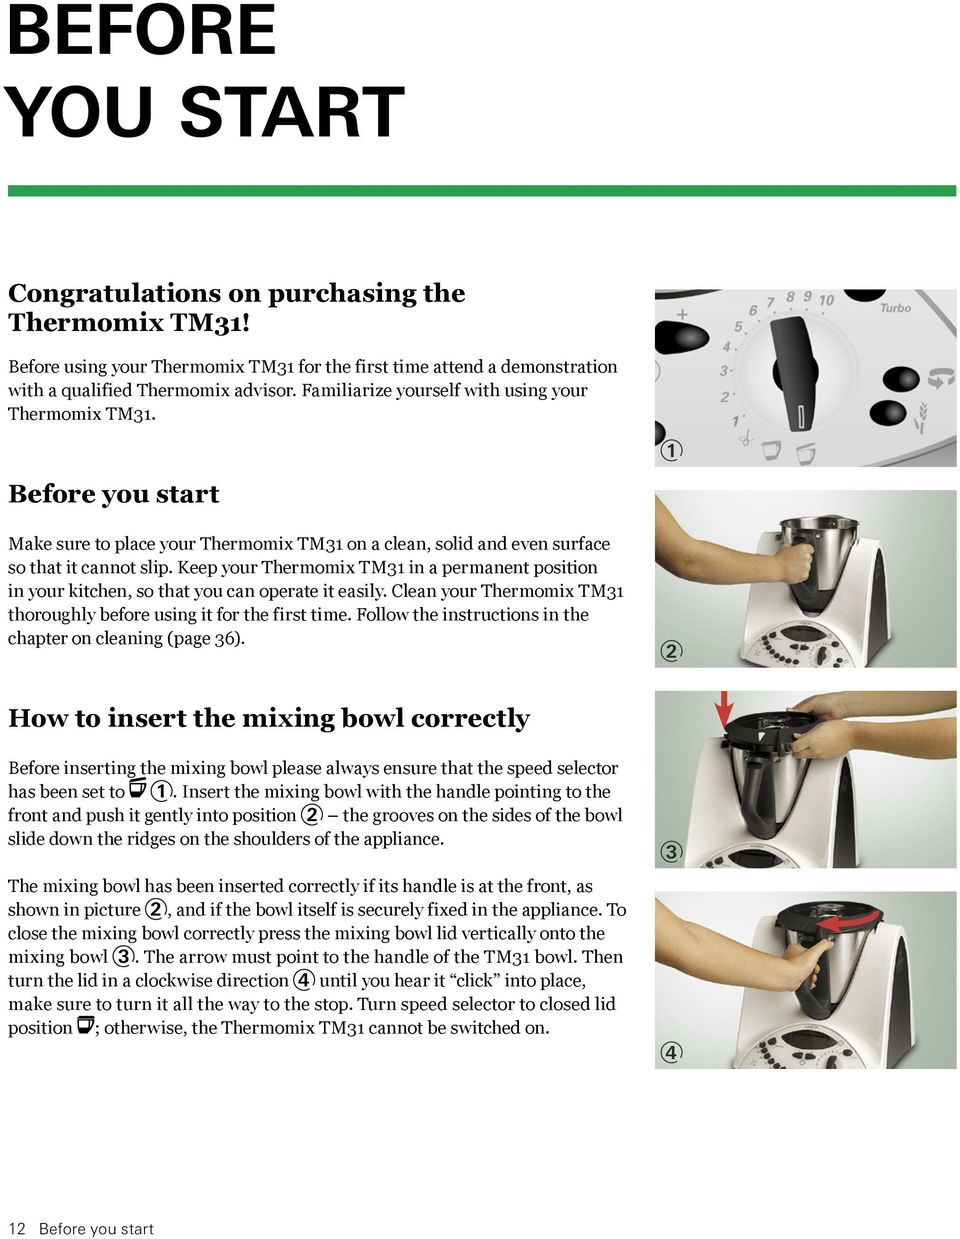 Keep your Thermomix TM31 in a permanent position in your kitchen, so that you can operate it easily. Clean your Thermomix TM31 thoroughly before using it for the first time.